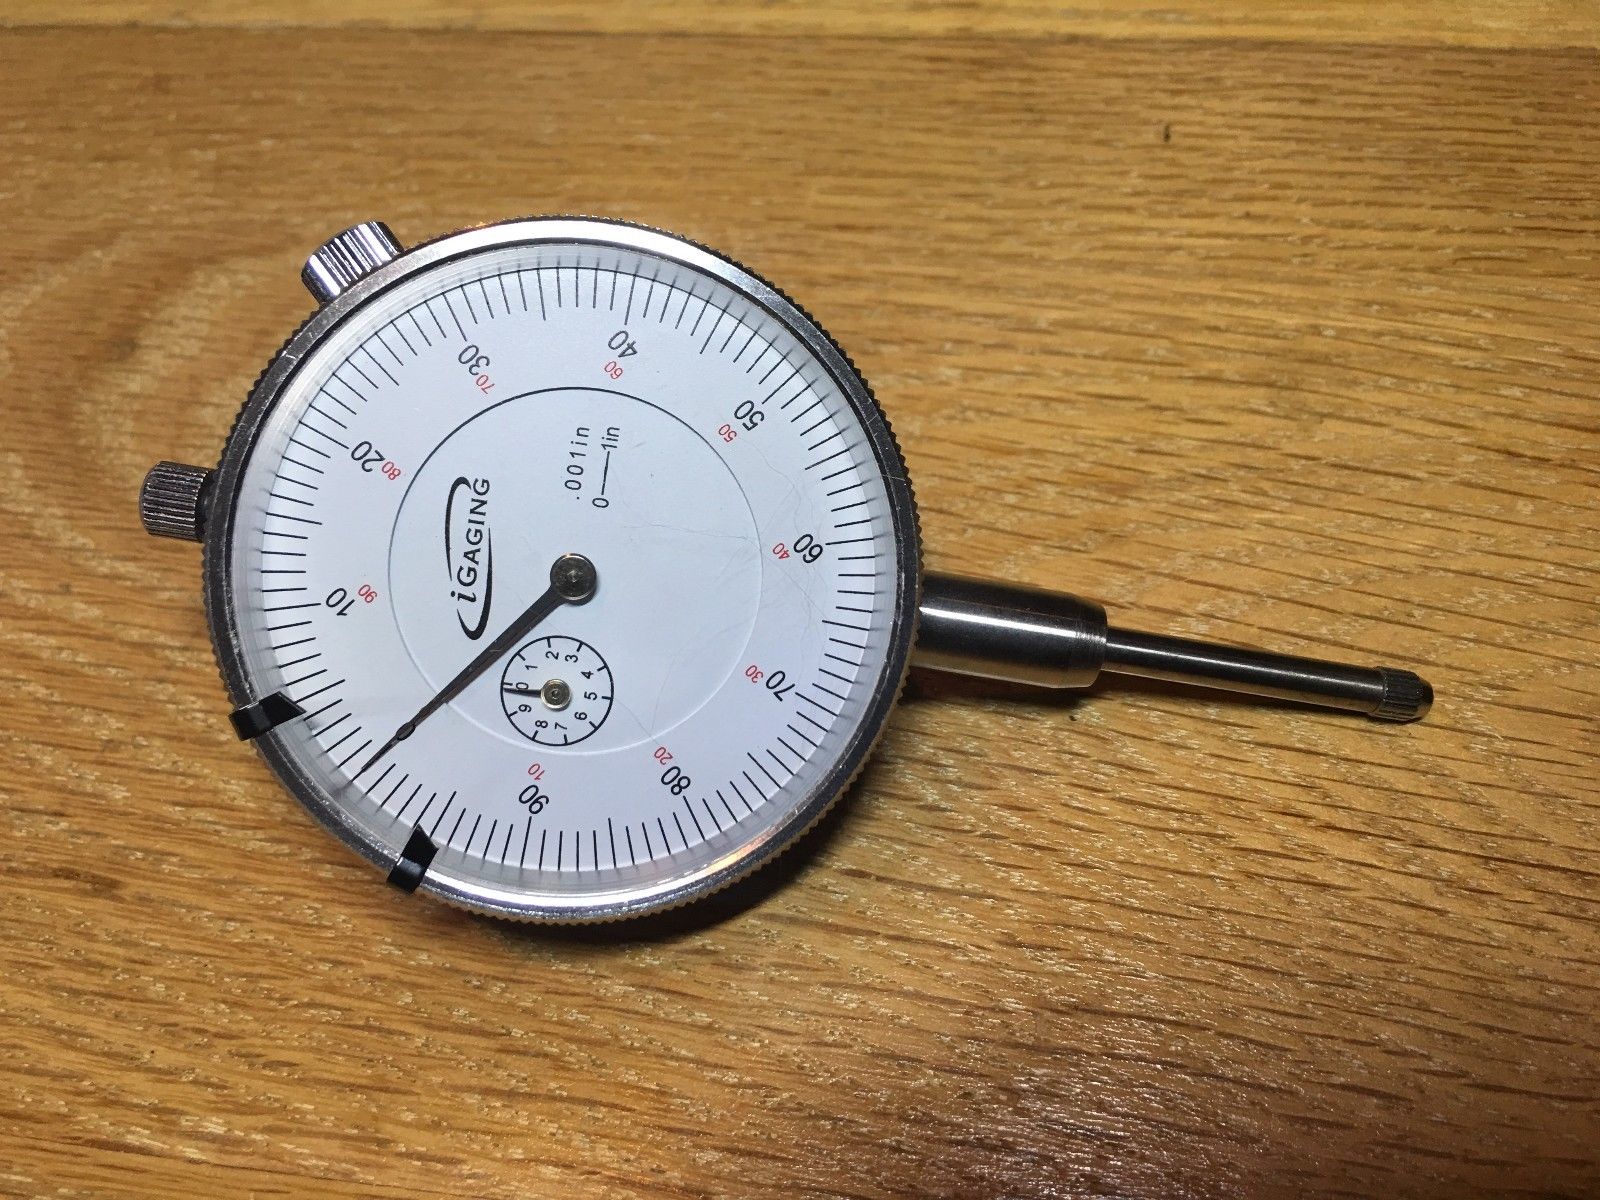 iGaging Dial Test Indicator Gauge with 1" Travel and Accuracy to .001" per 1"